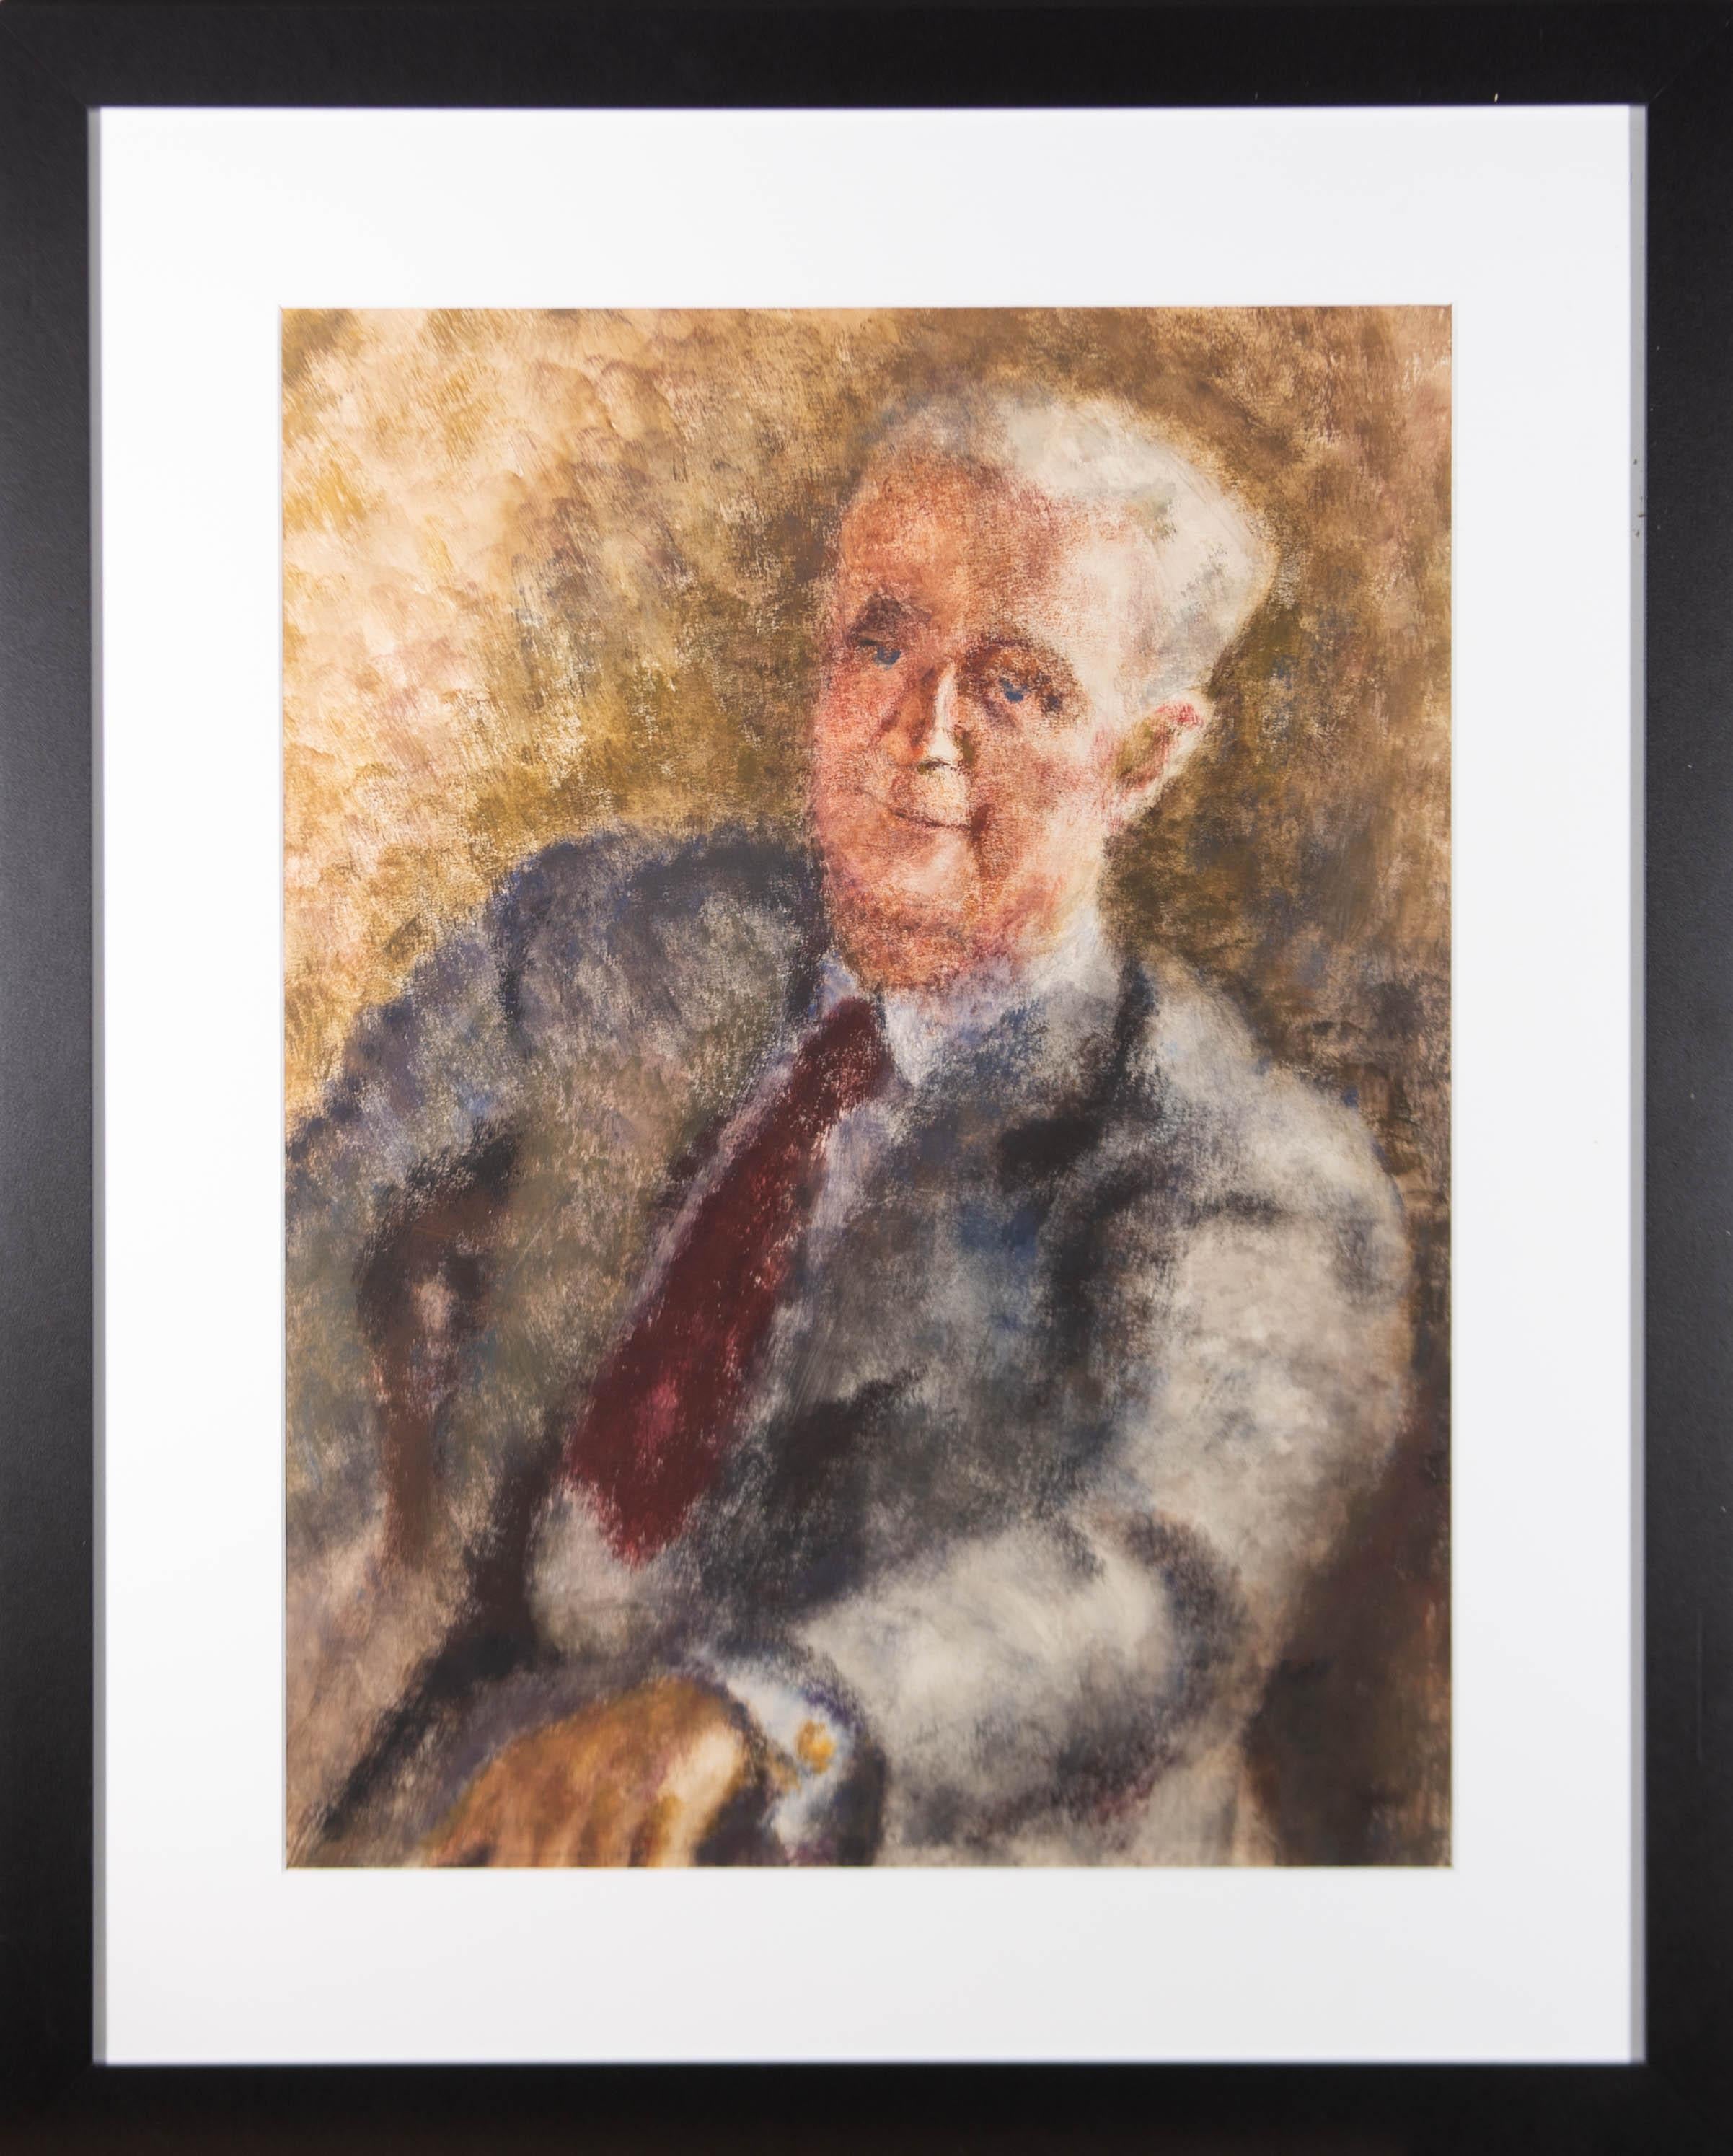 A charmingly characterful portrait of a smart gentleman in a red tie. The artist has used an unusual dry brush technique to give the gouache a textured, scrubbed effect. The lack of harsh lines due to this technique gives the lighting a soft and